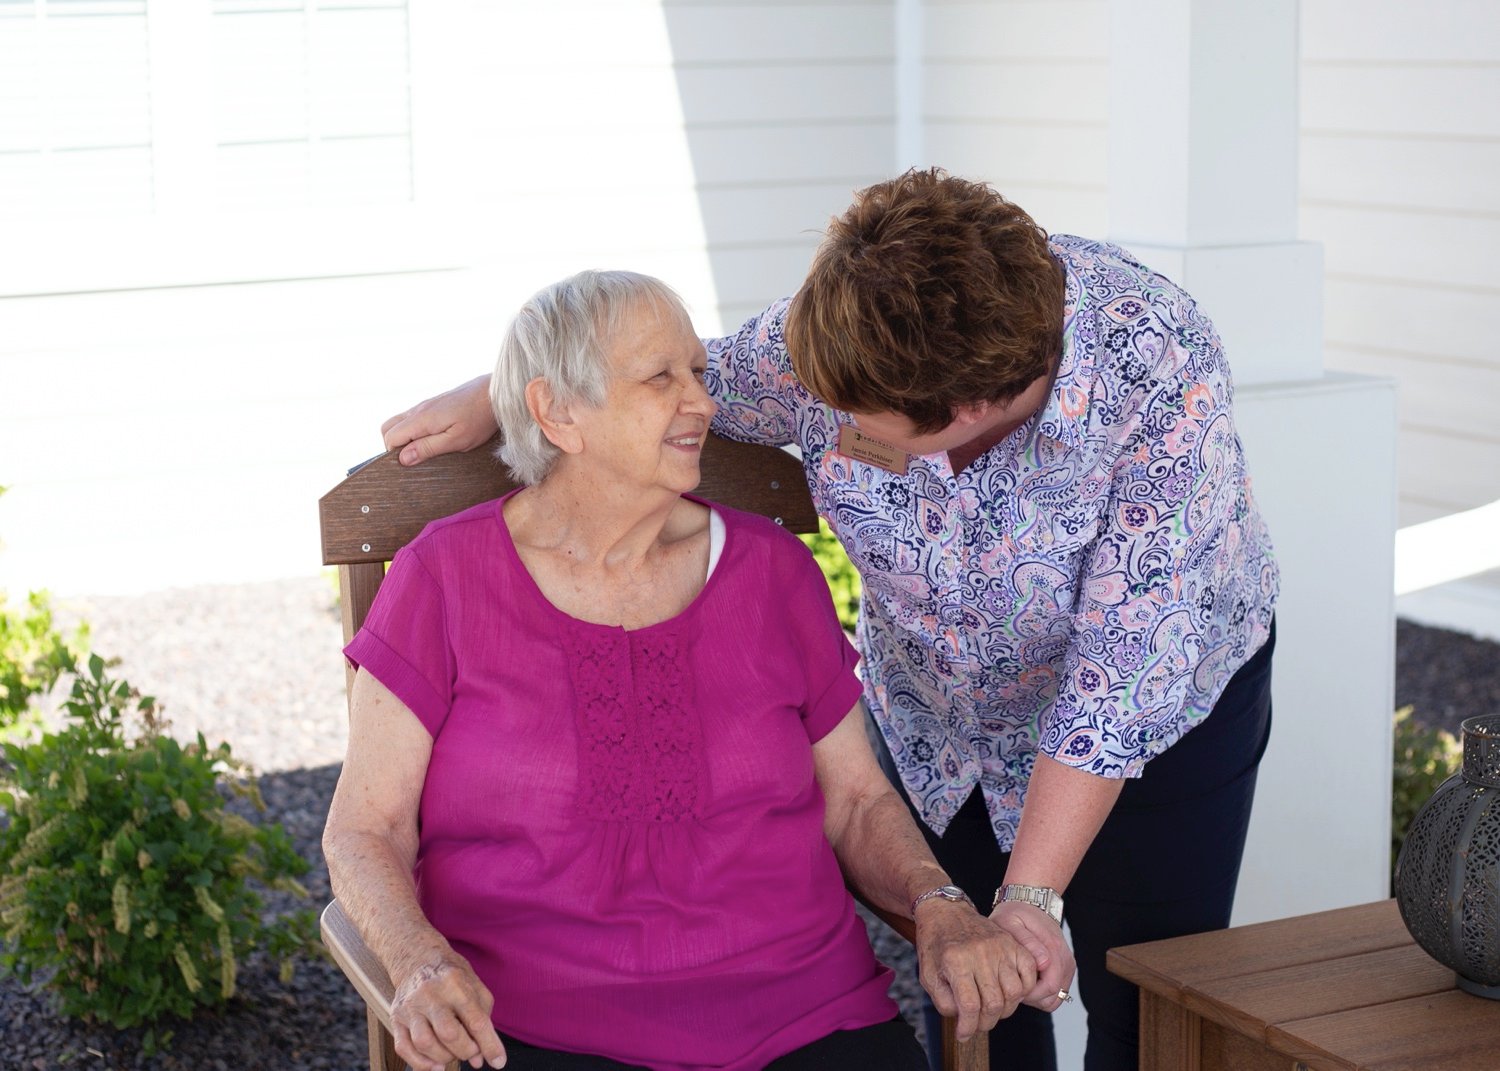 EdisonLakes_Homepage_PictureYourselfHere_Dedicated_Staff_Cargiver_Helping_Resident-1